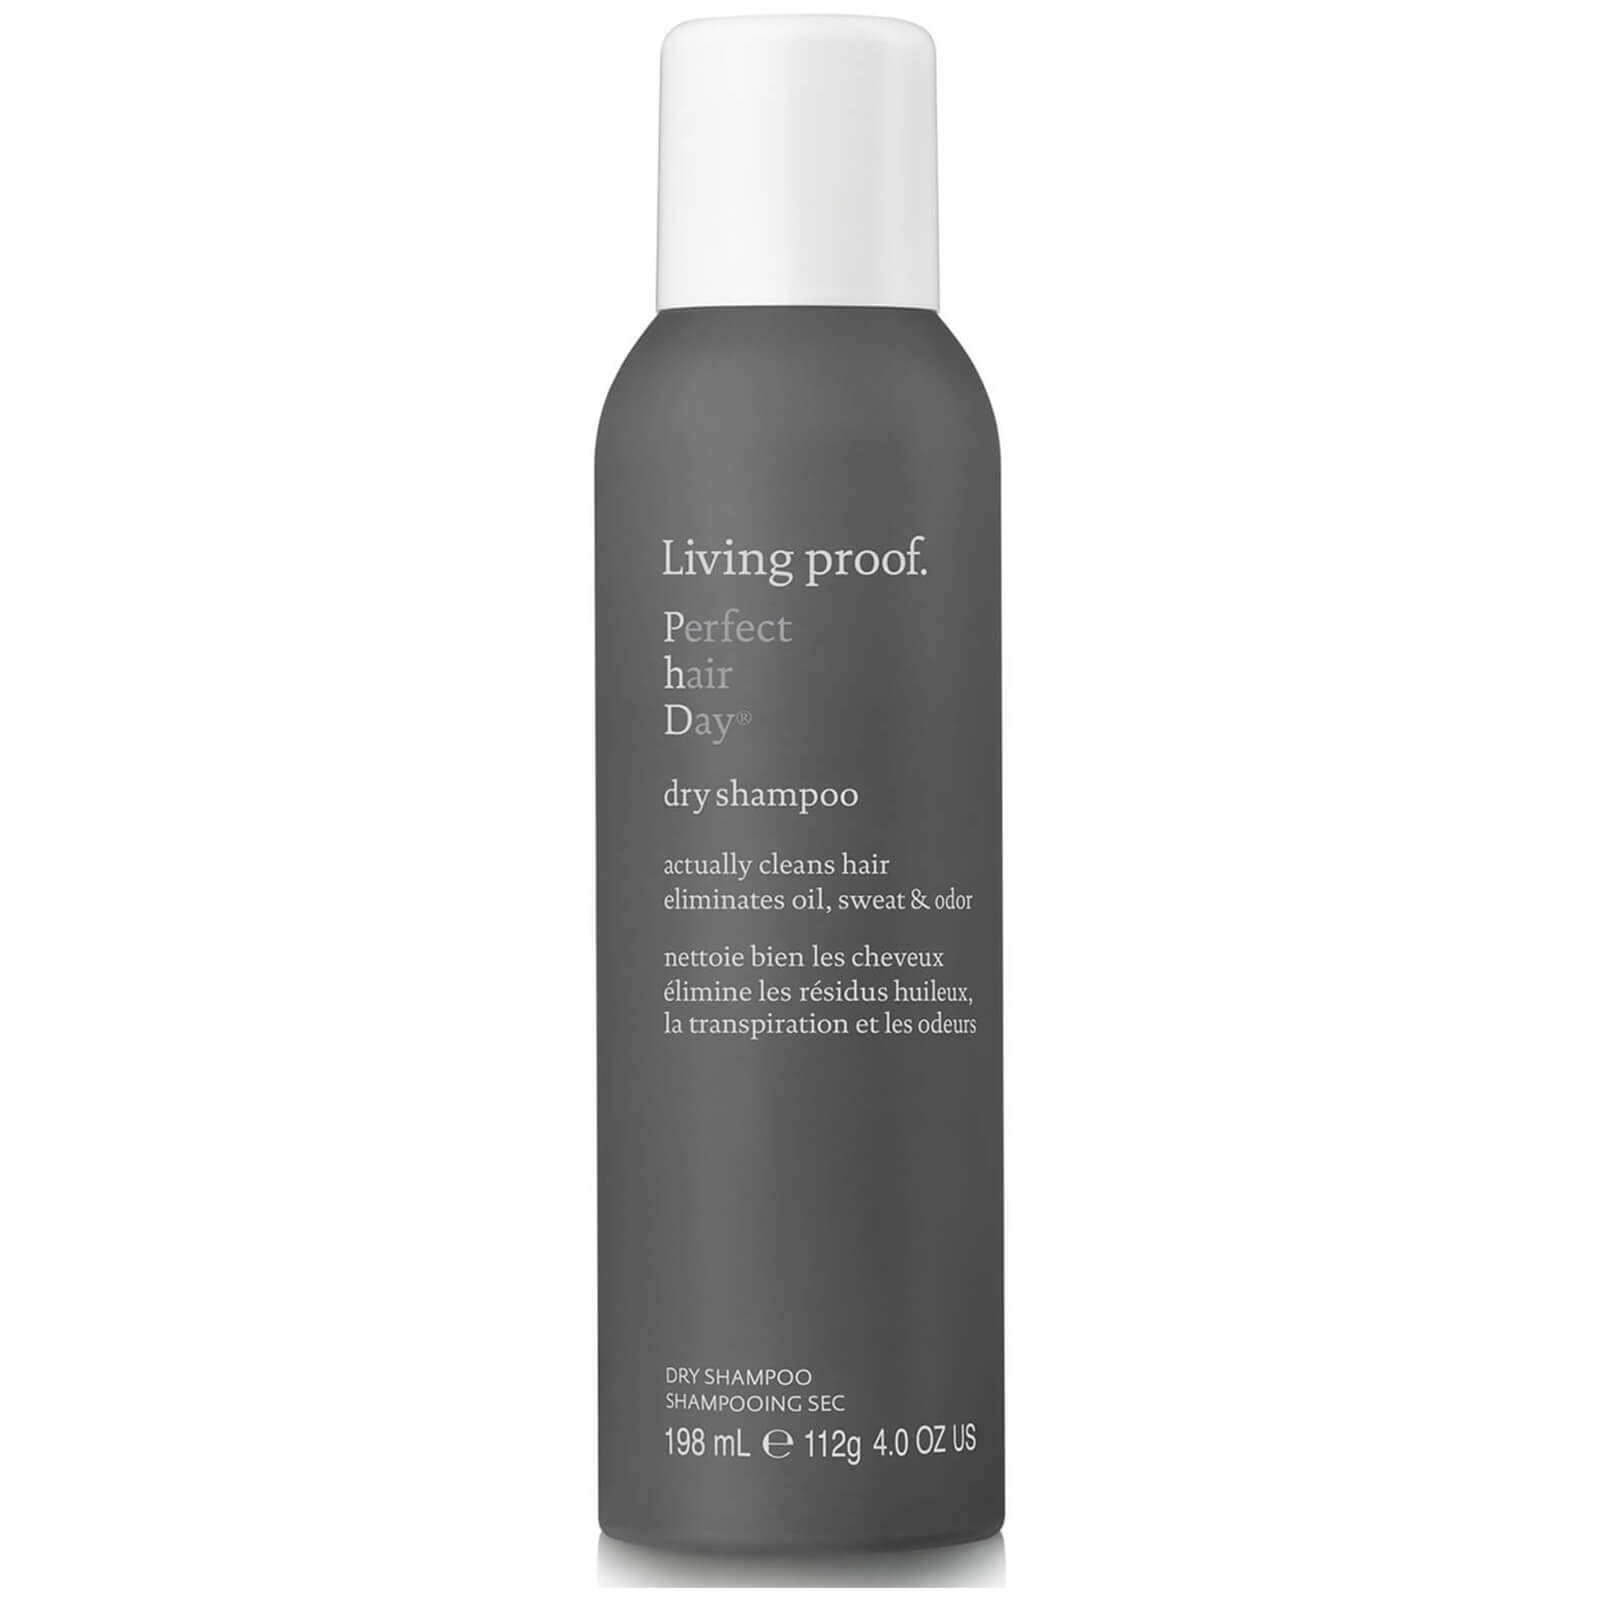 Image of Living Proof Perfect Hair Day (PhD) Dry Shampoo 198ml